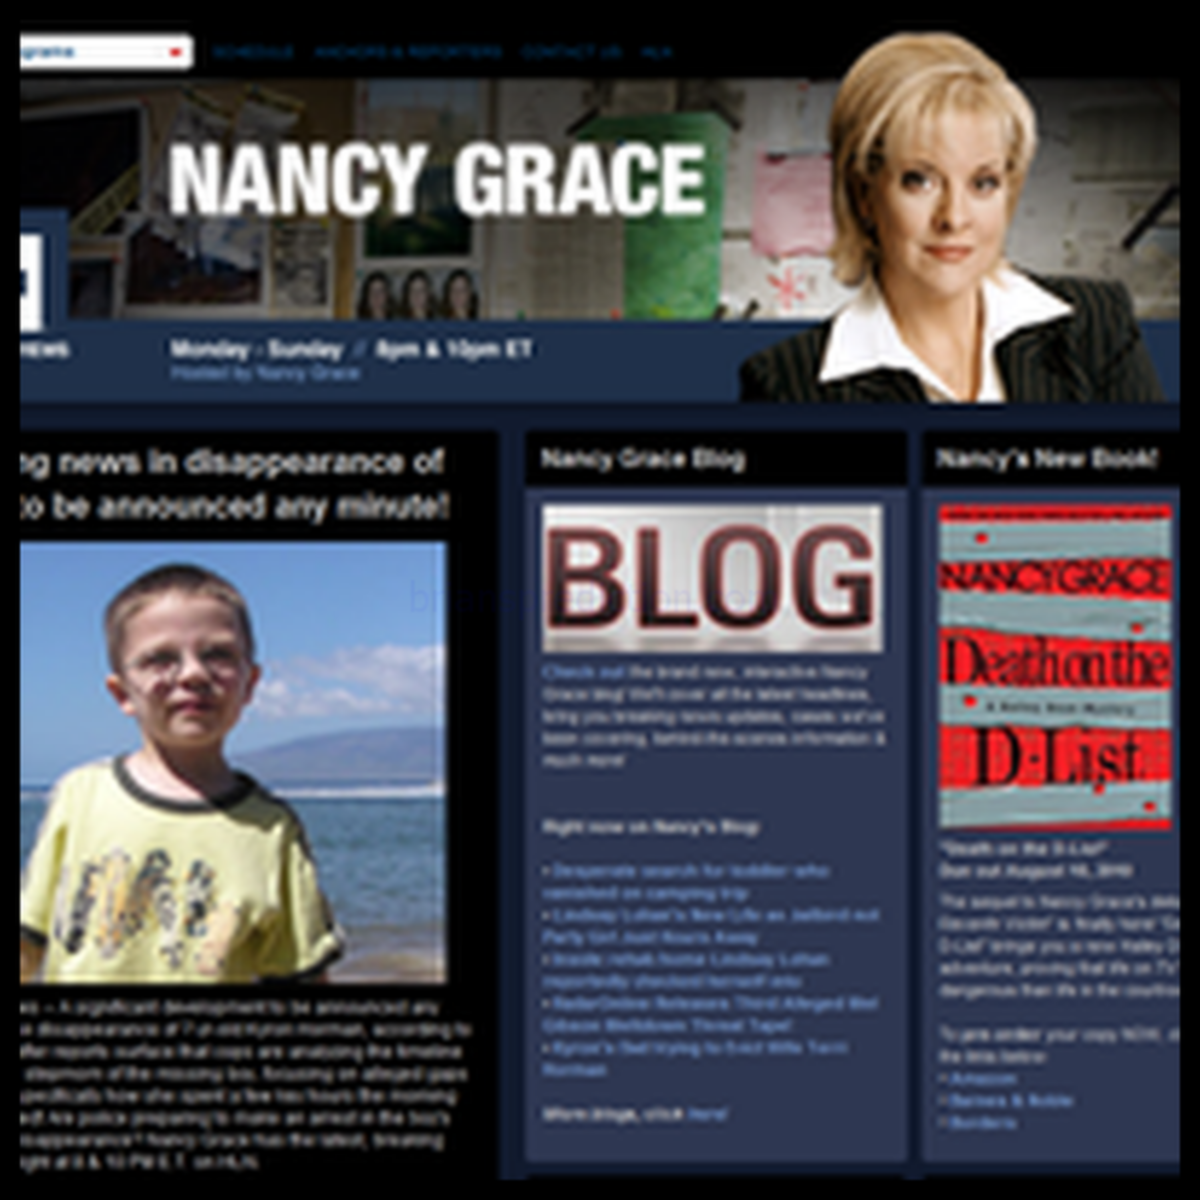 Nancy Grace Missing Person Cases Psychic Detective Brian Ladd Update On Case  Images Q3Dtbn And9gcqk4b1ipxvtgvrwg4fxnmyu41tepc1wdwybp1cvt97yllcy3hlc Found ~0
Nancy Grace Missing Person Cases Psychic Detective Brian Ladd Update On Case  Images Q3Dtbn And9gcqk4b1ipxvtgvrwg4fxnmyu41tepc1wdwybp1cvt97yllcy3hlc Found ~0
